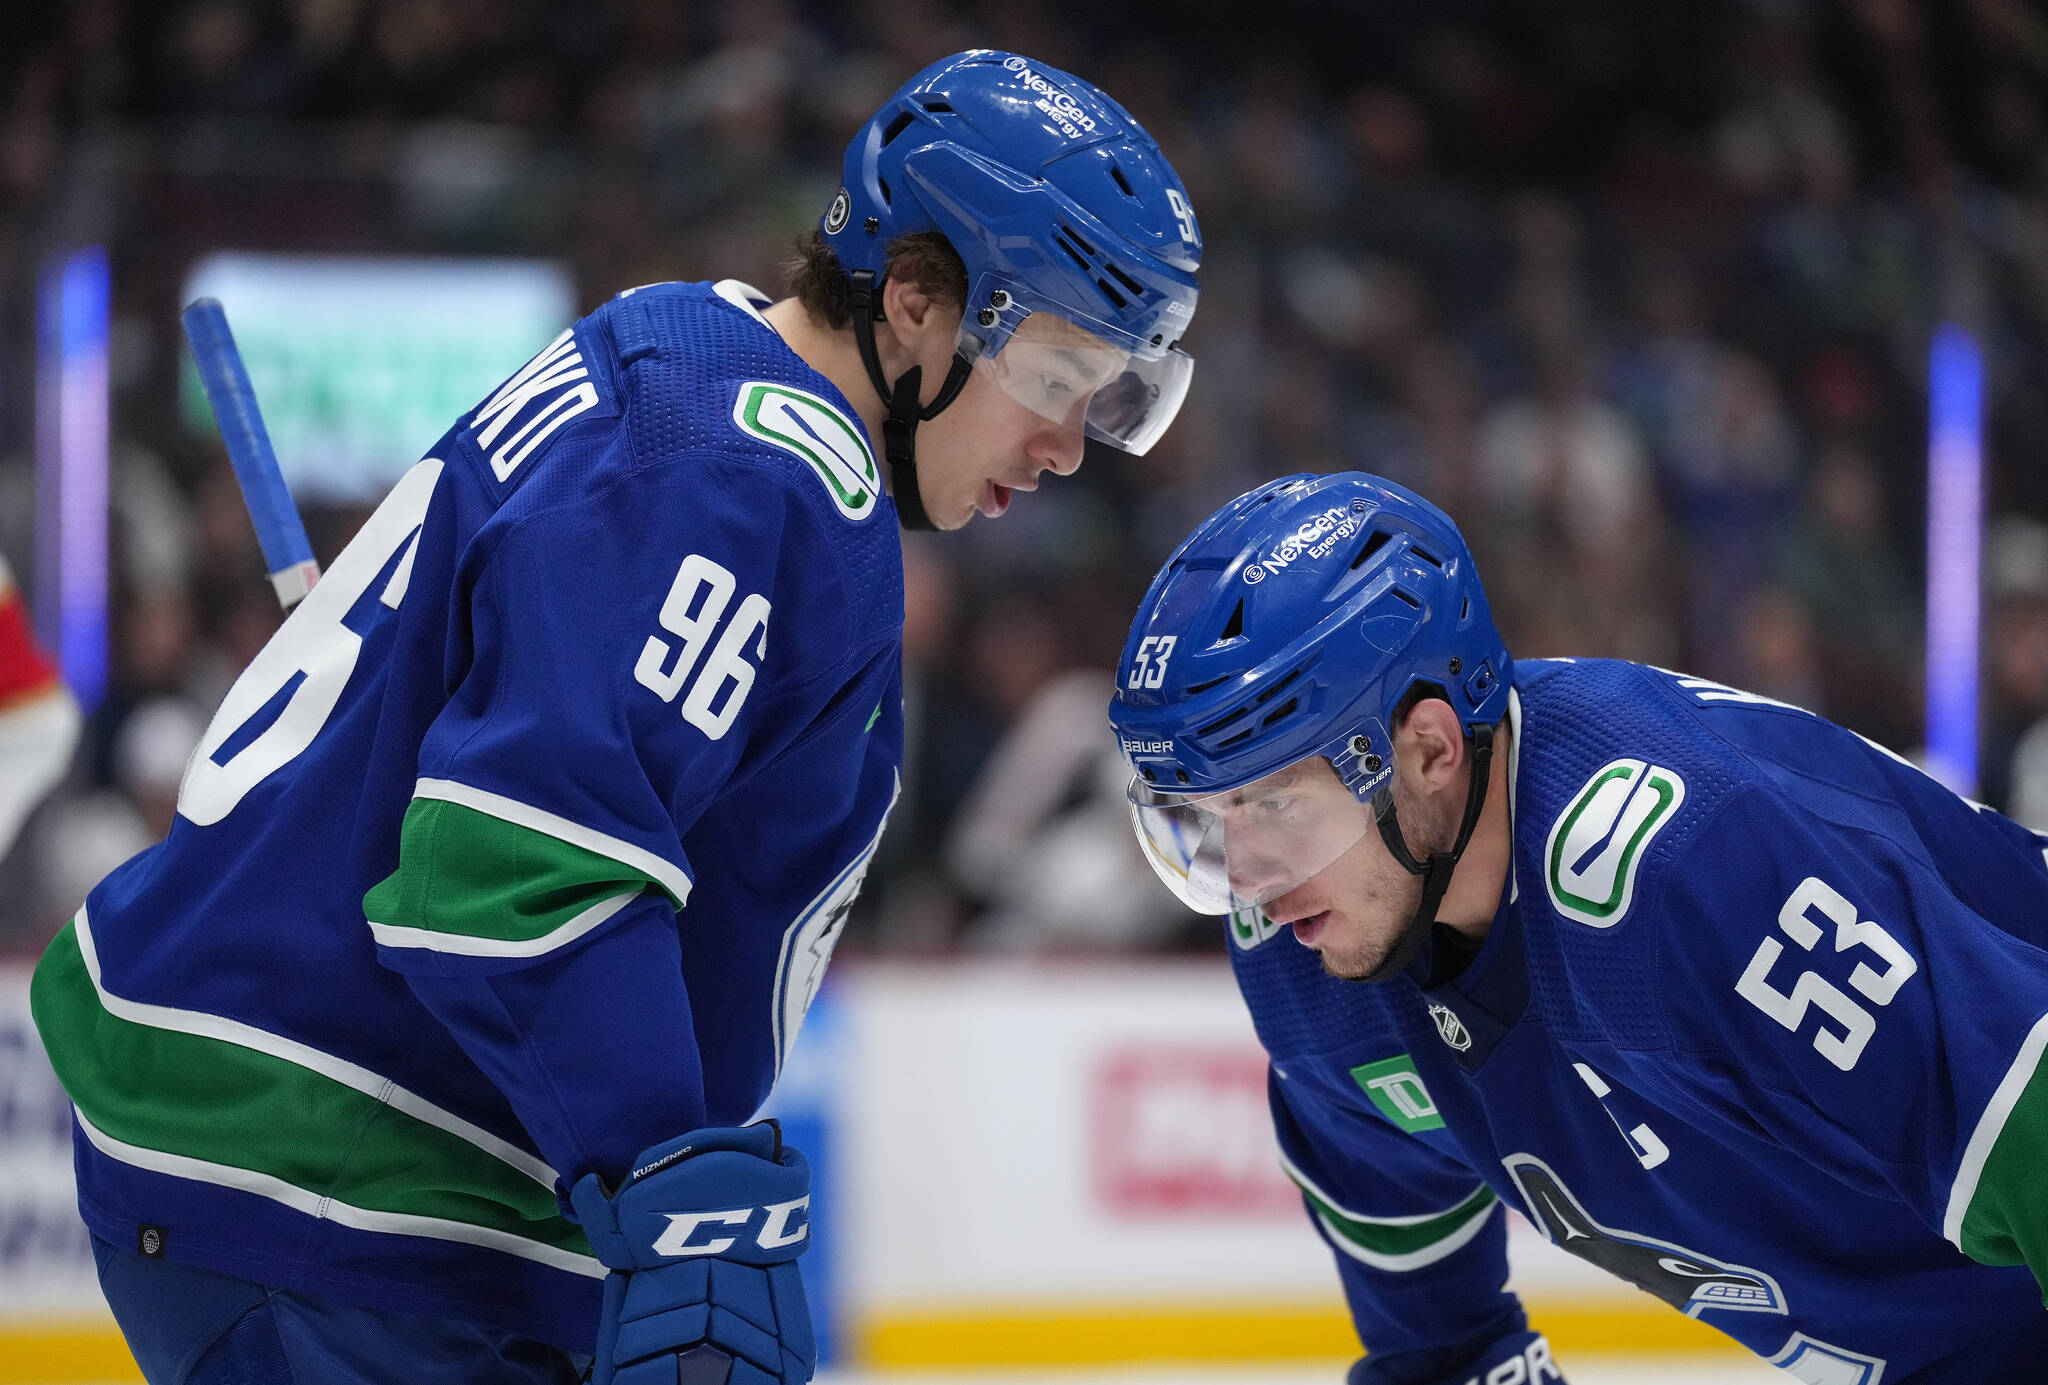 Vancouver Canucks’ Andrei Kuzmenko, left, of Russia, and Bo Horvat talk before a faceoff against the Florida Panthers during the third period of an NHL hockey game in Vancouver, on Thursday, December 1, 2022. THE CANADIAN PRESS/Darryl Dyck